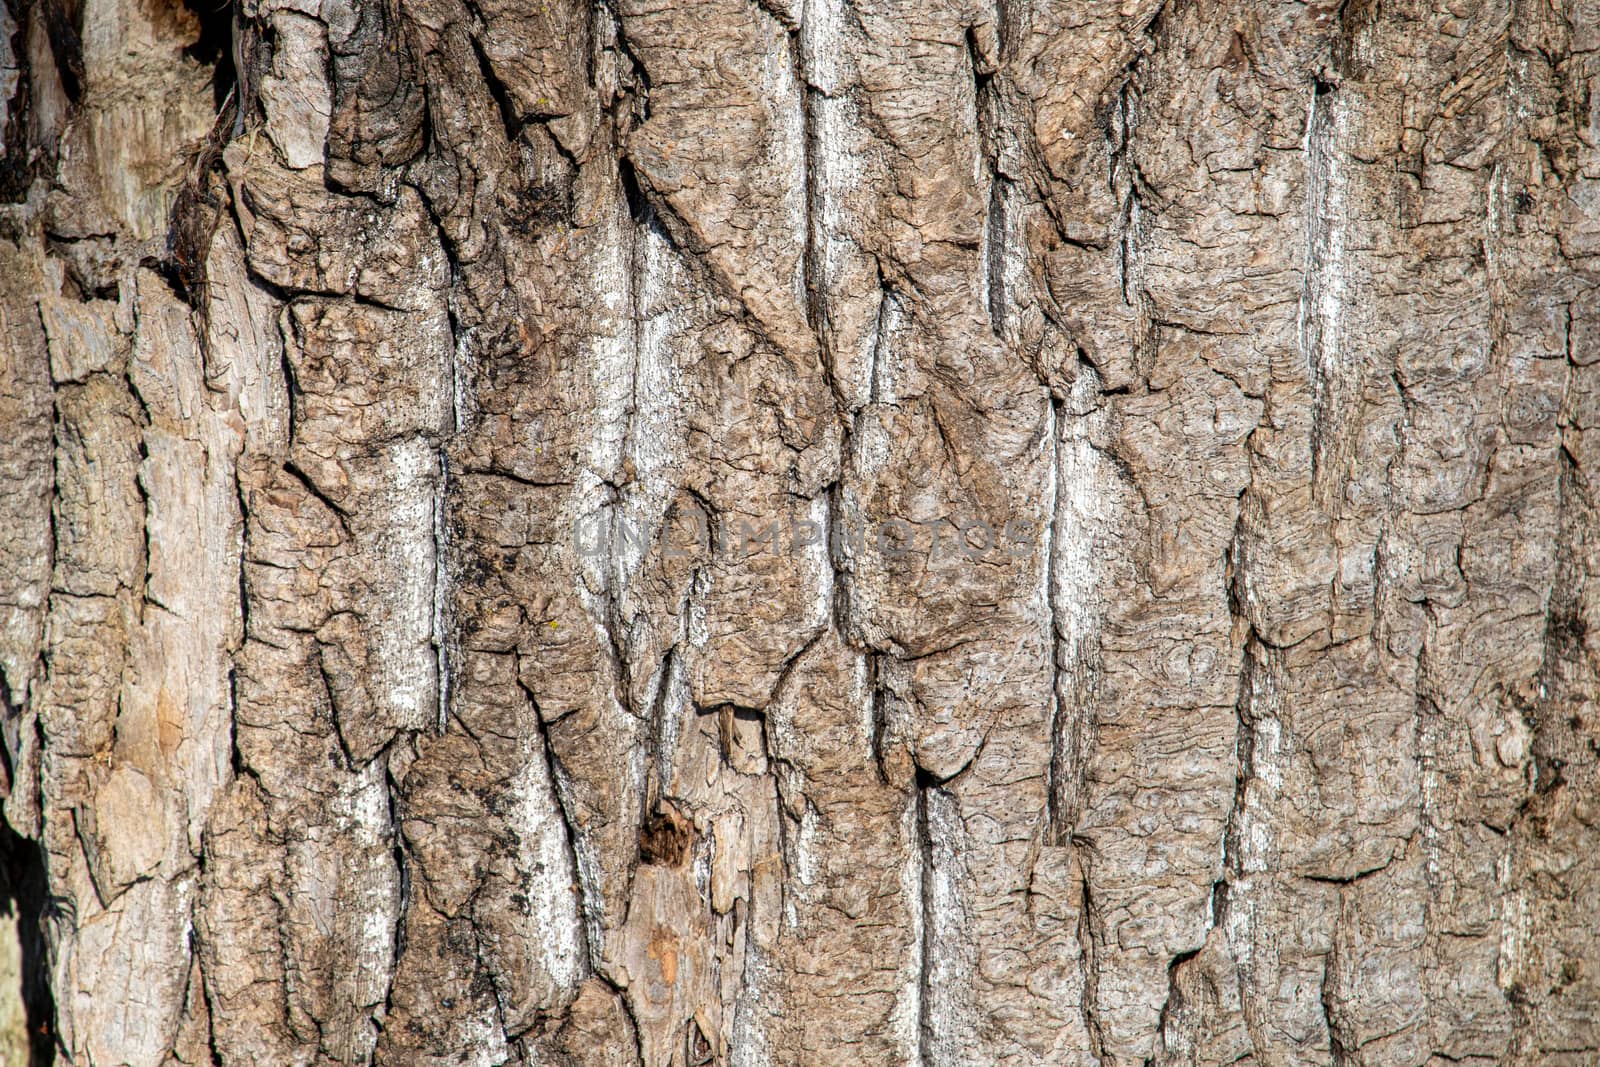 Close-up textured background showing vertical grooves in the brown and gray bark of a tree trunk, with variations throughout.